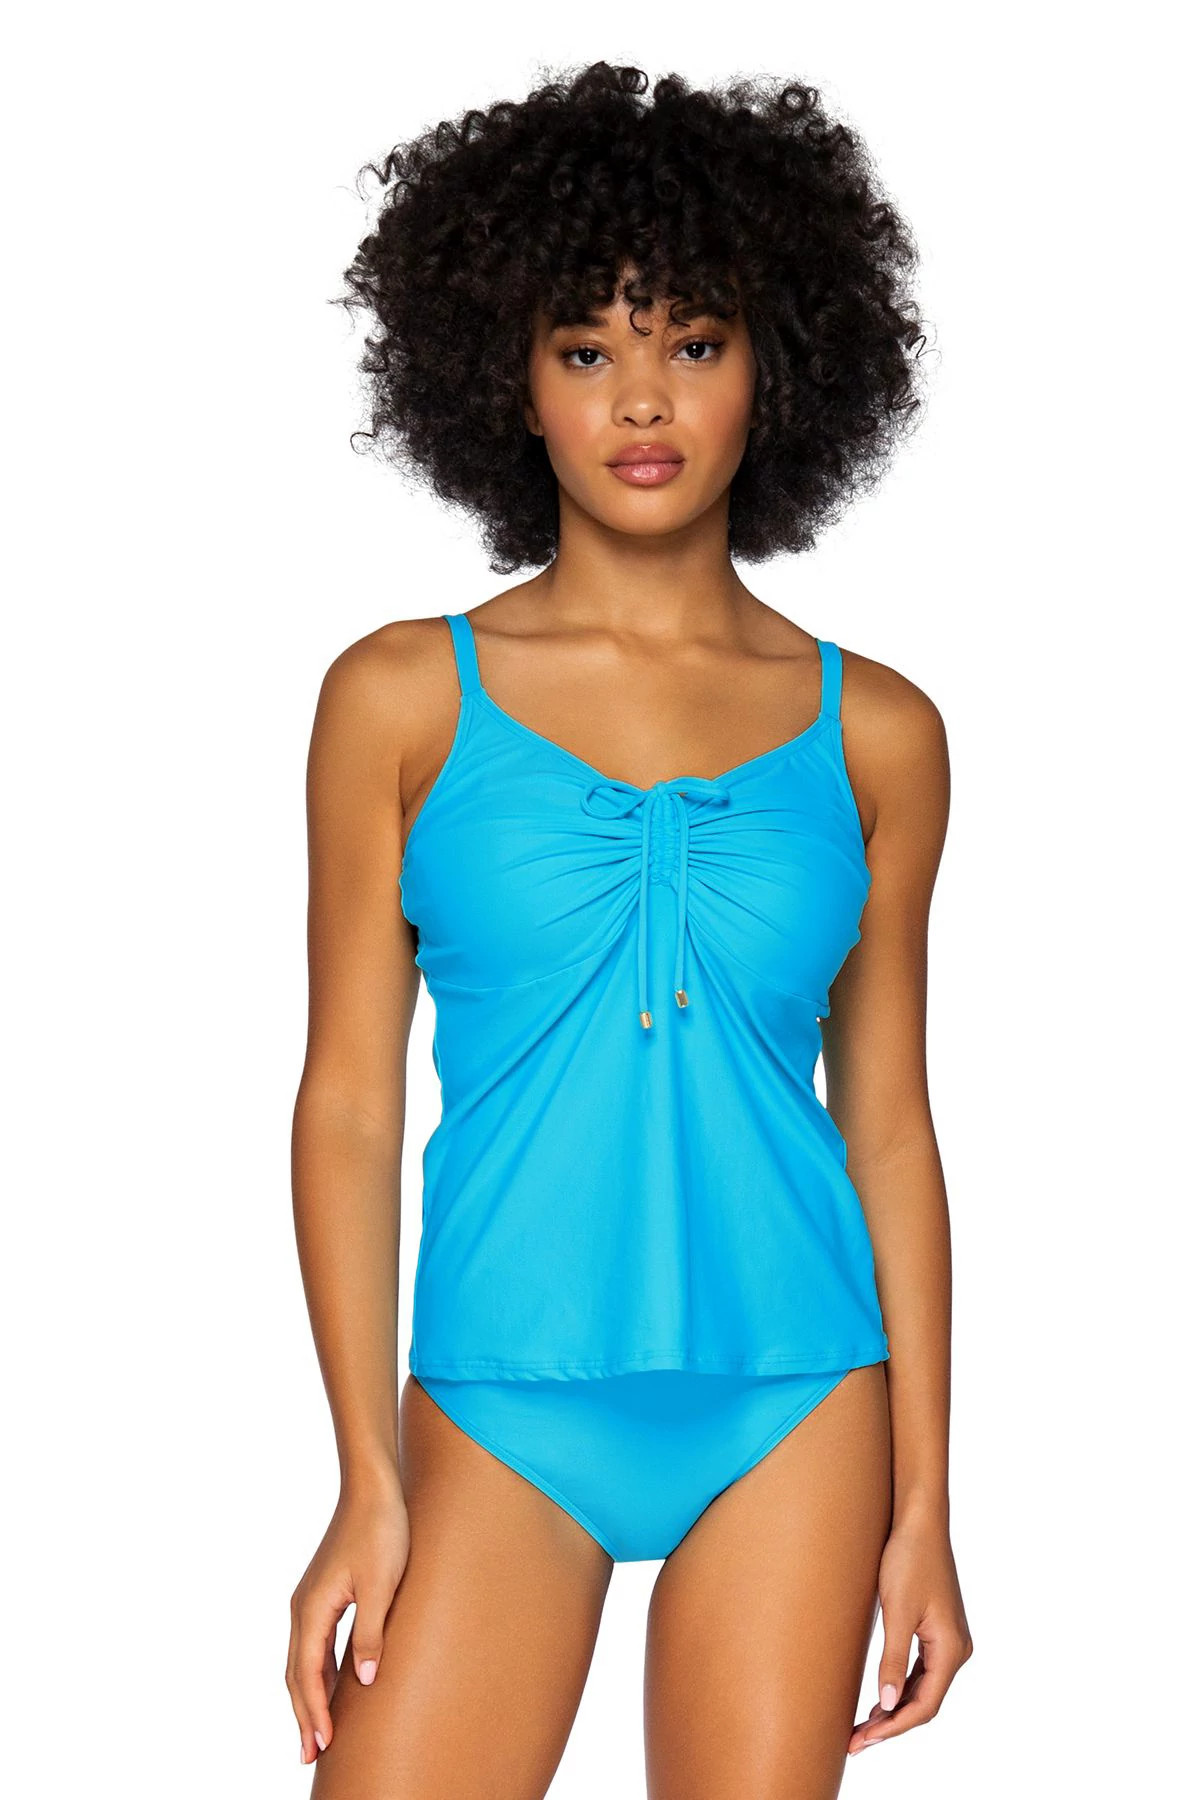 POOLSIDE BLUE Avery Over The Shoulder Tankini Top (E-H Cup) image number 1